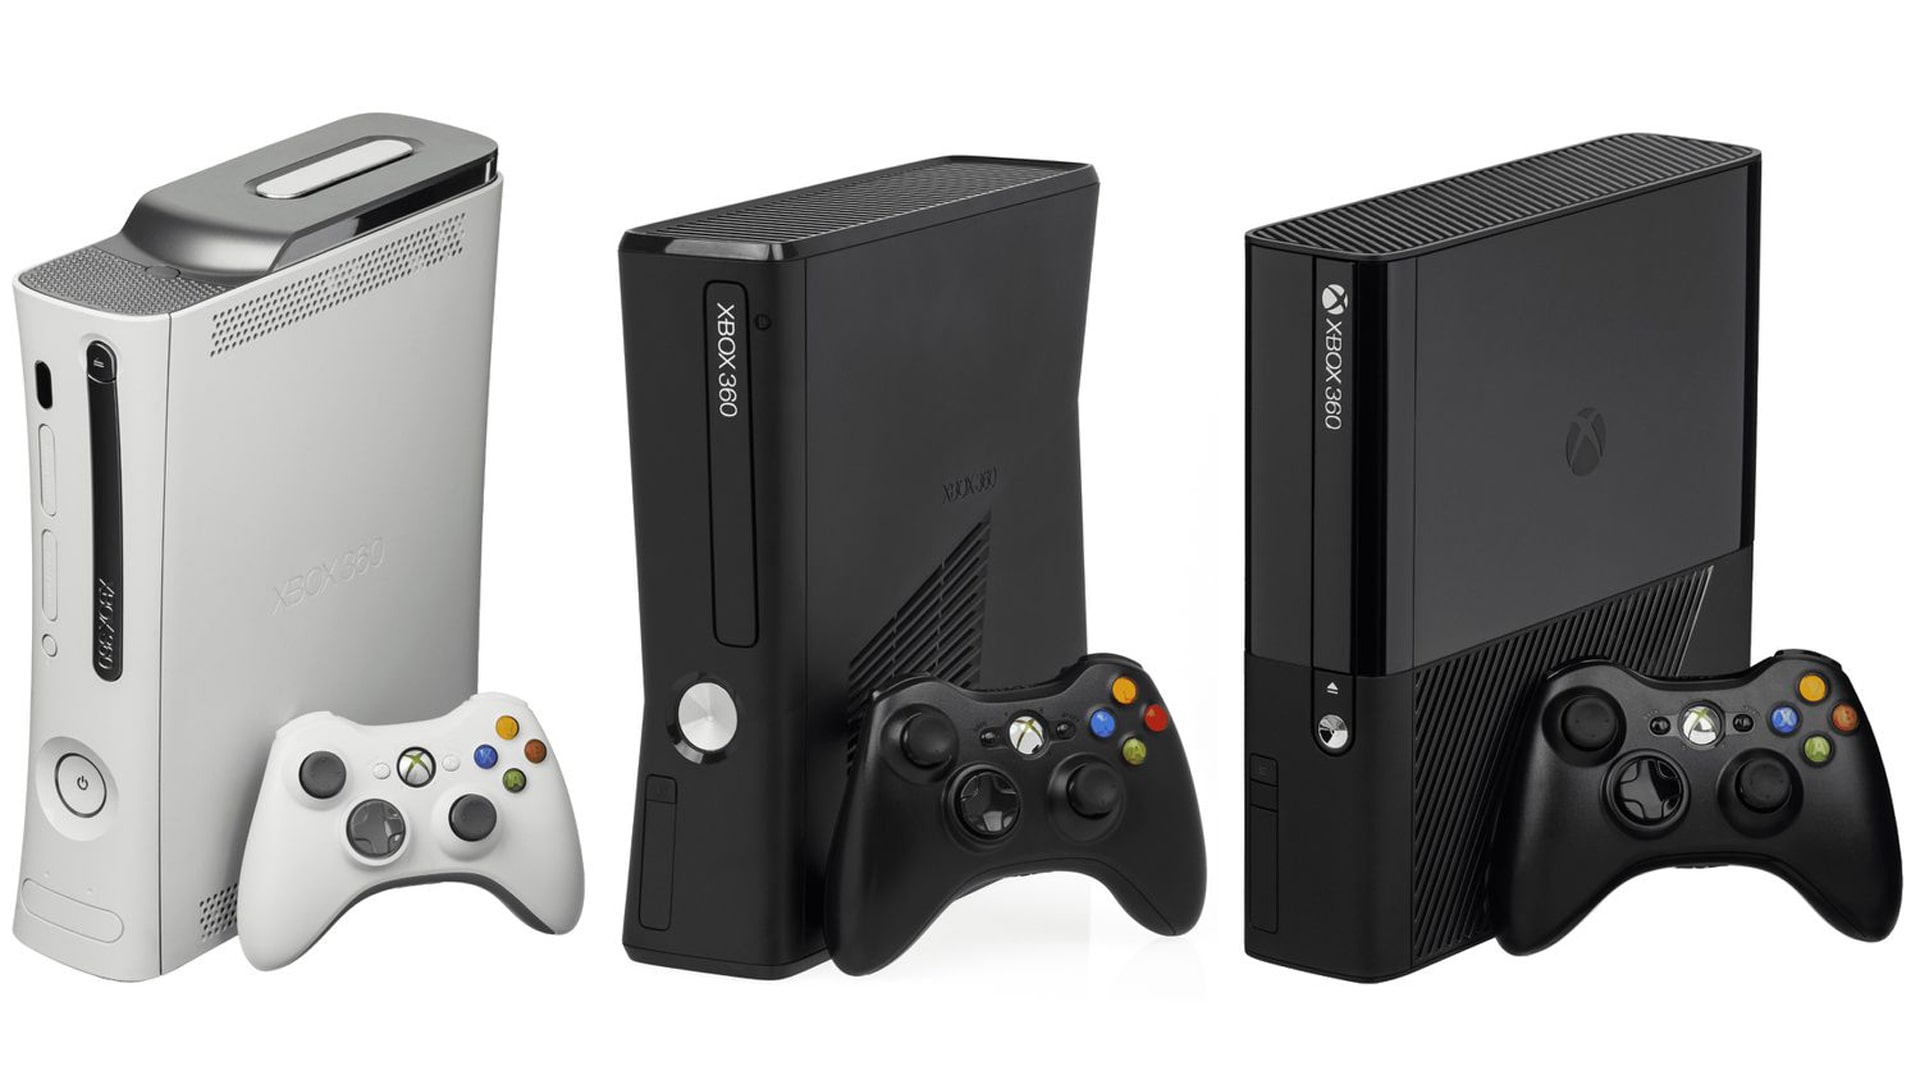 A photo of three Xbox 360 video game consoles